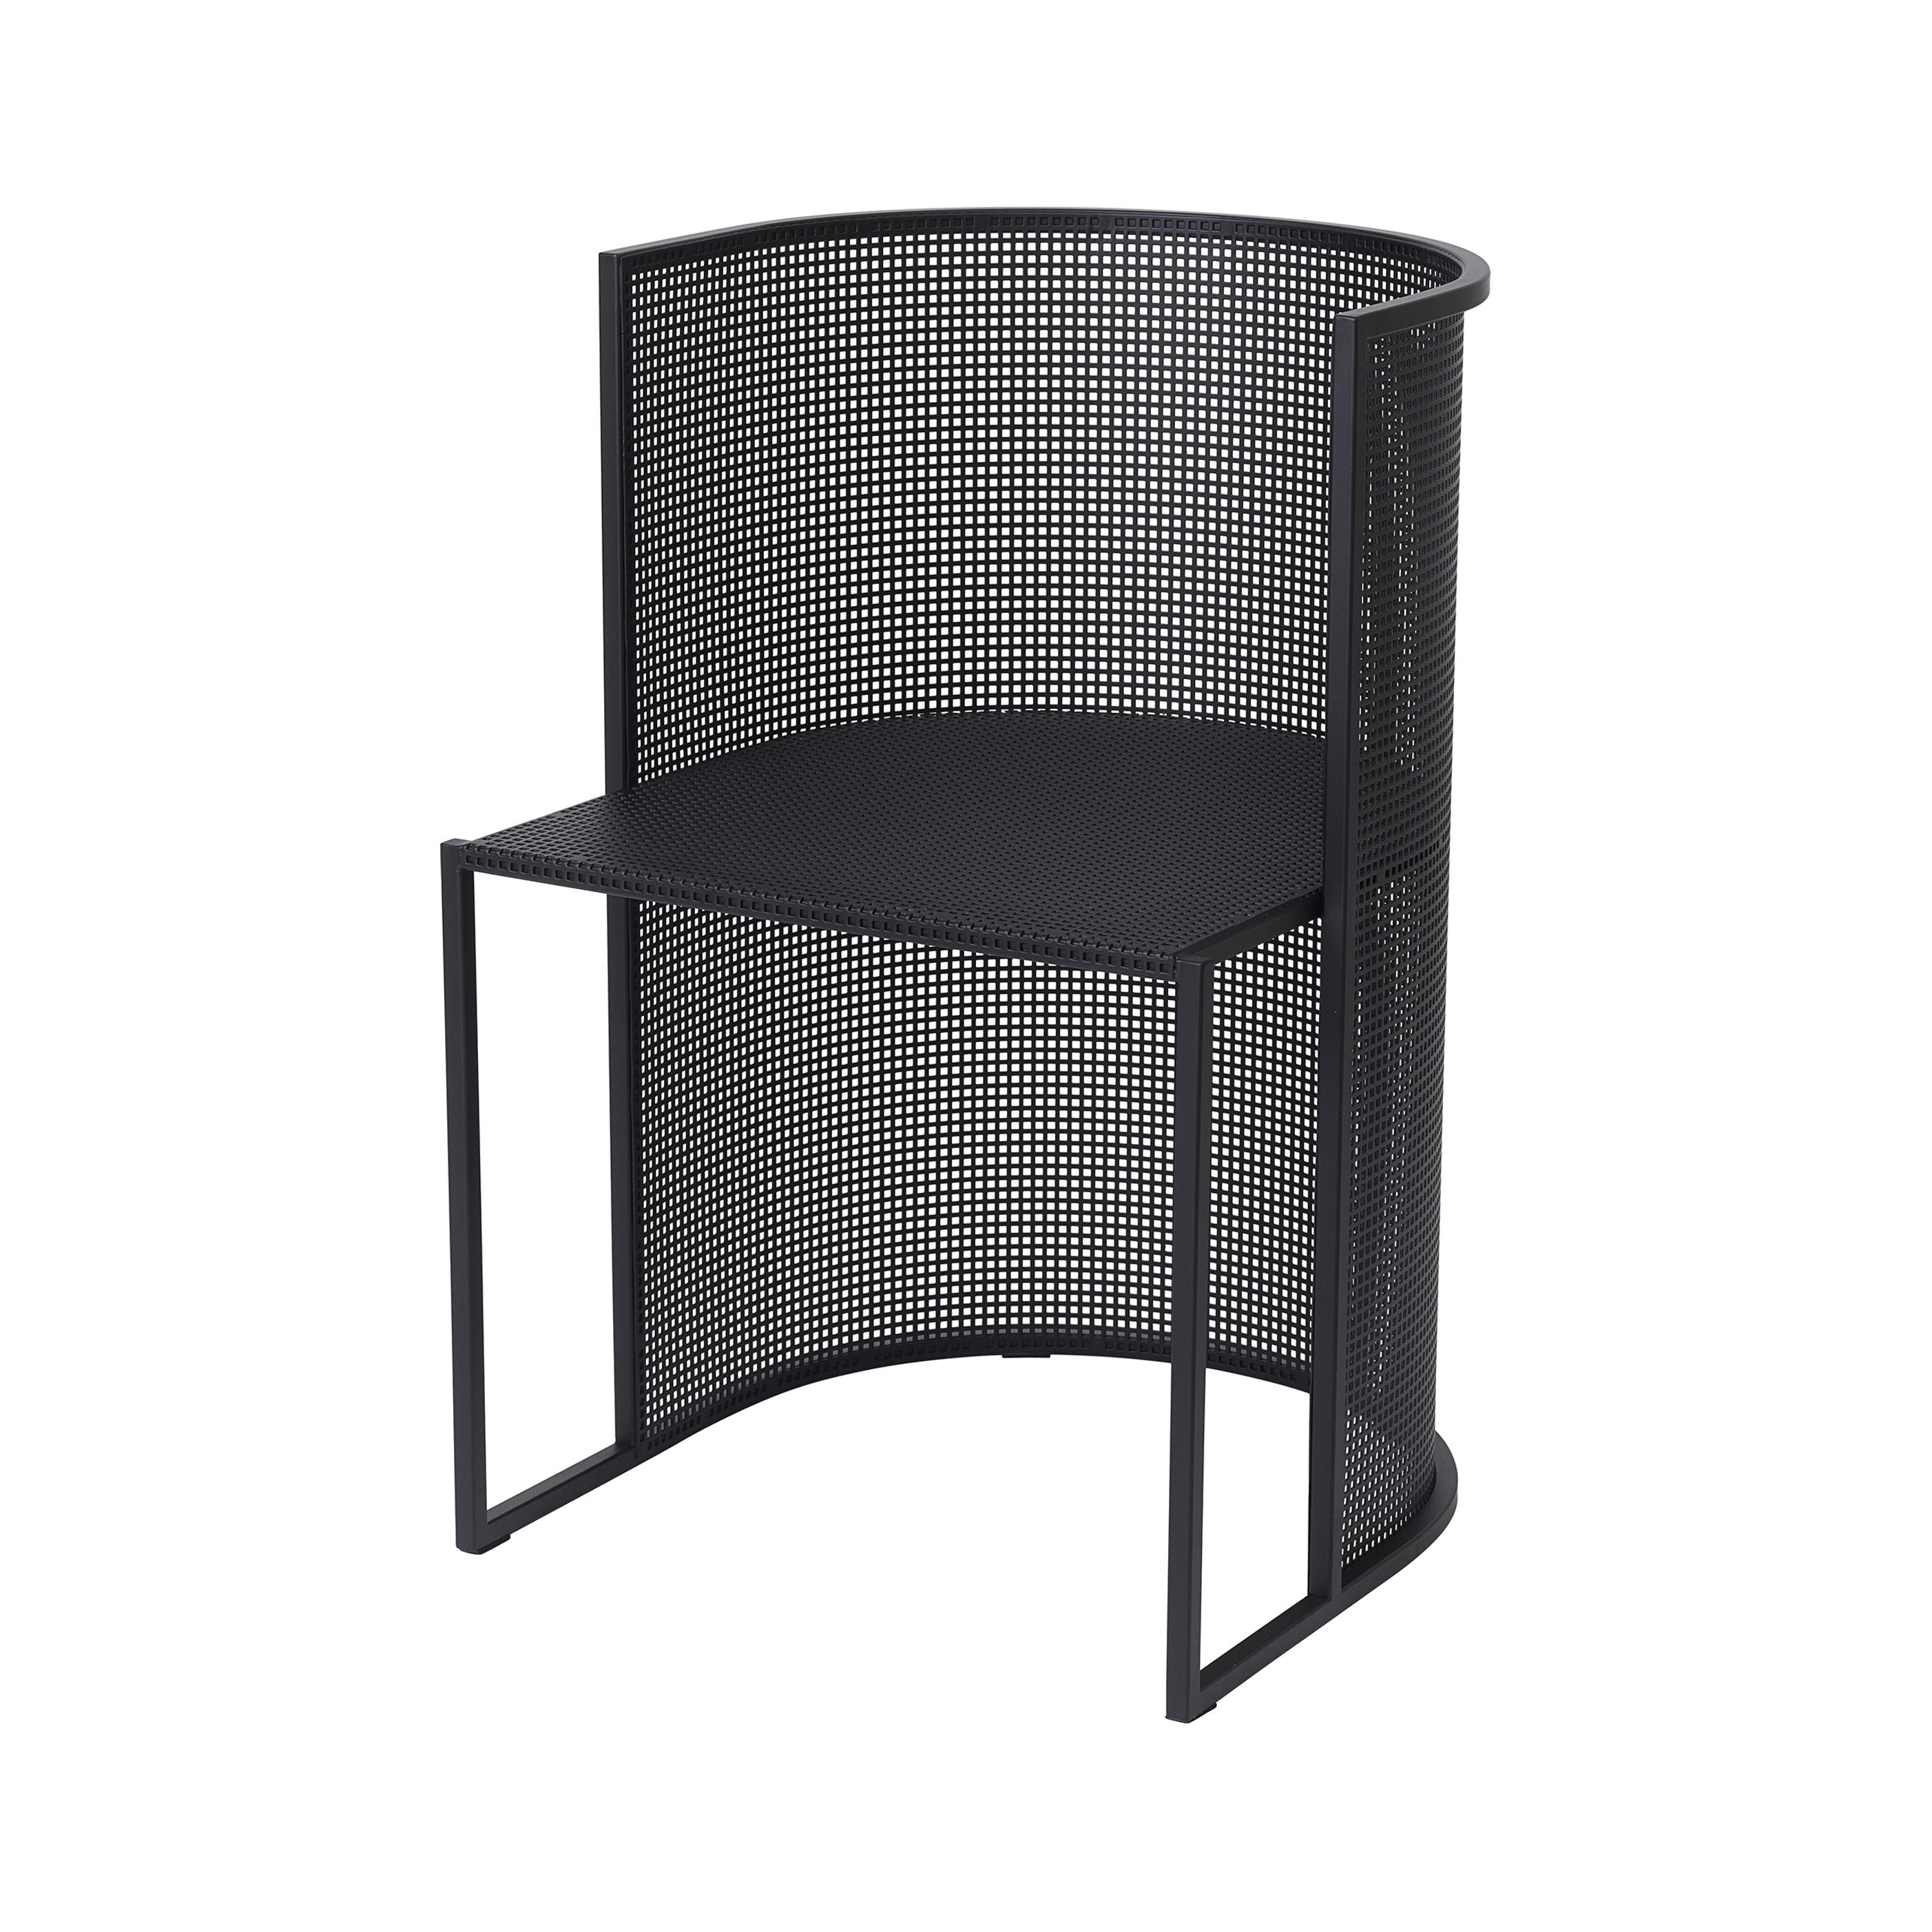 Steel Bahaus dining chair by Kristina Dam Studio
Materials: Black outdoor powder-coated steel
Dimensions: 77 x 53 x 51 cm

Dimensions cannot be customized.

*Safe to use outdoor.

Kristina Dam graduated from The Royal Danish School of Fine